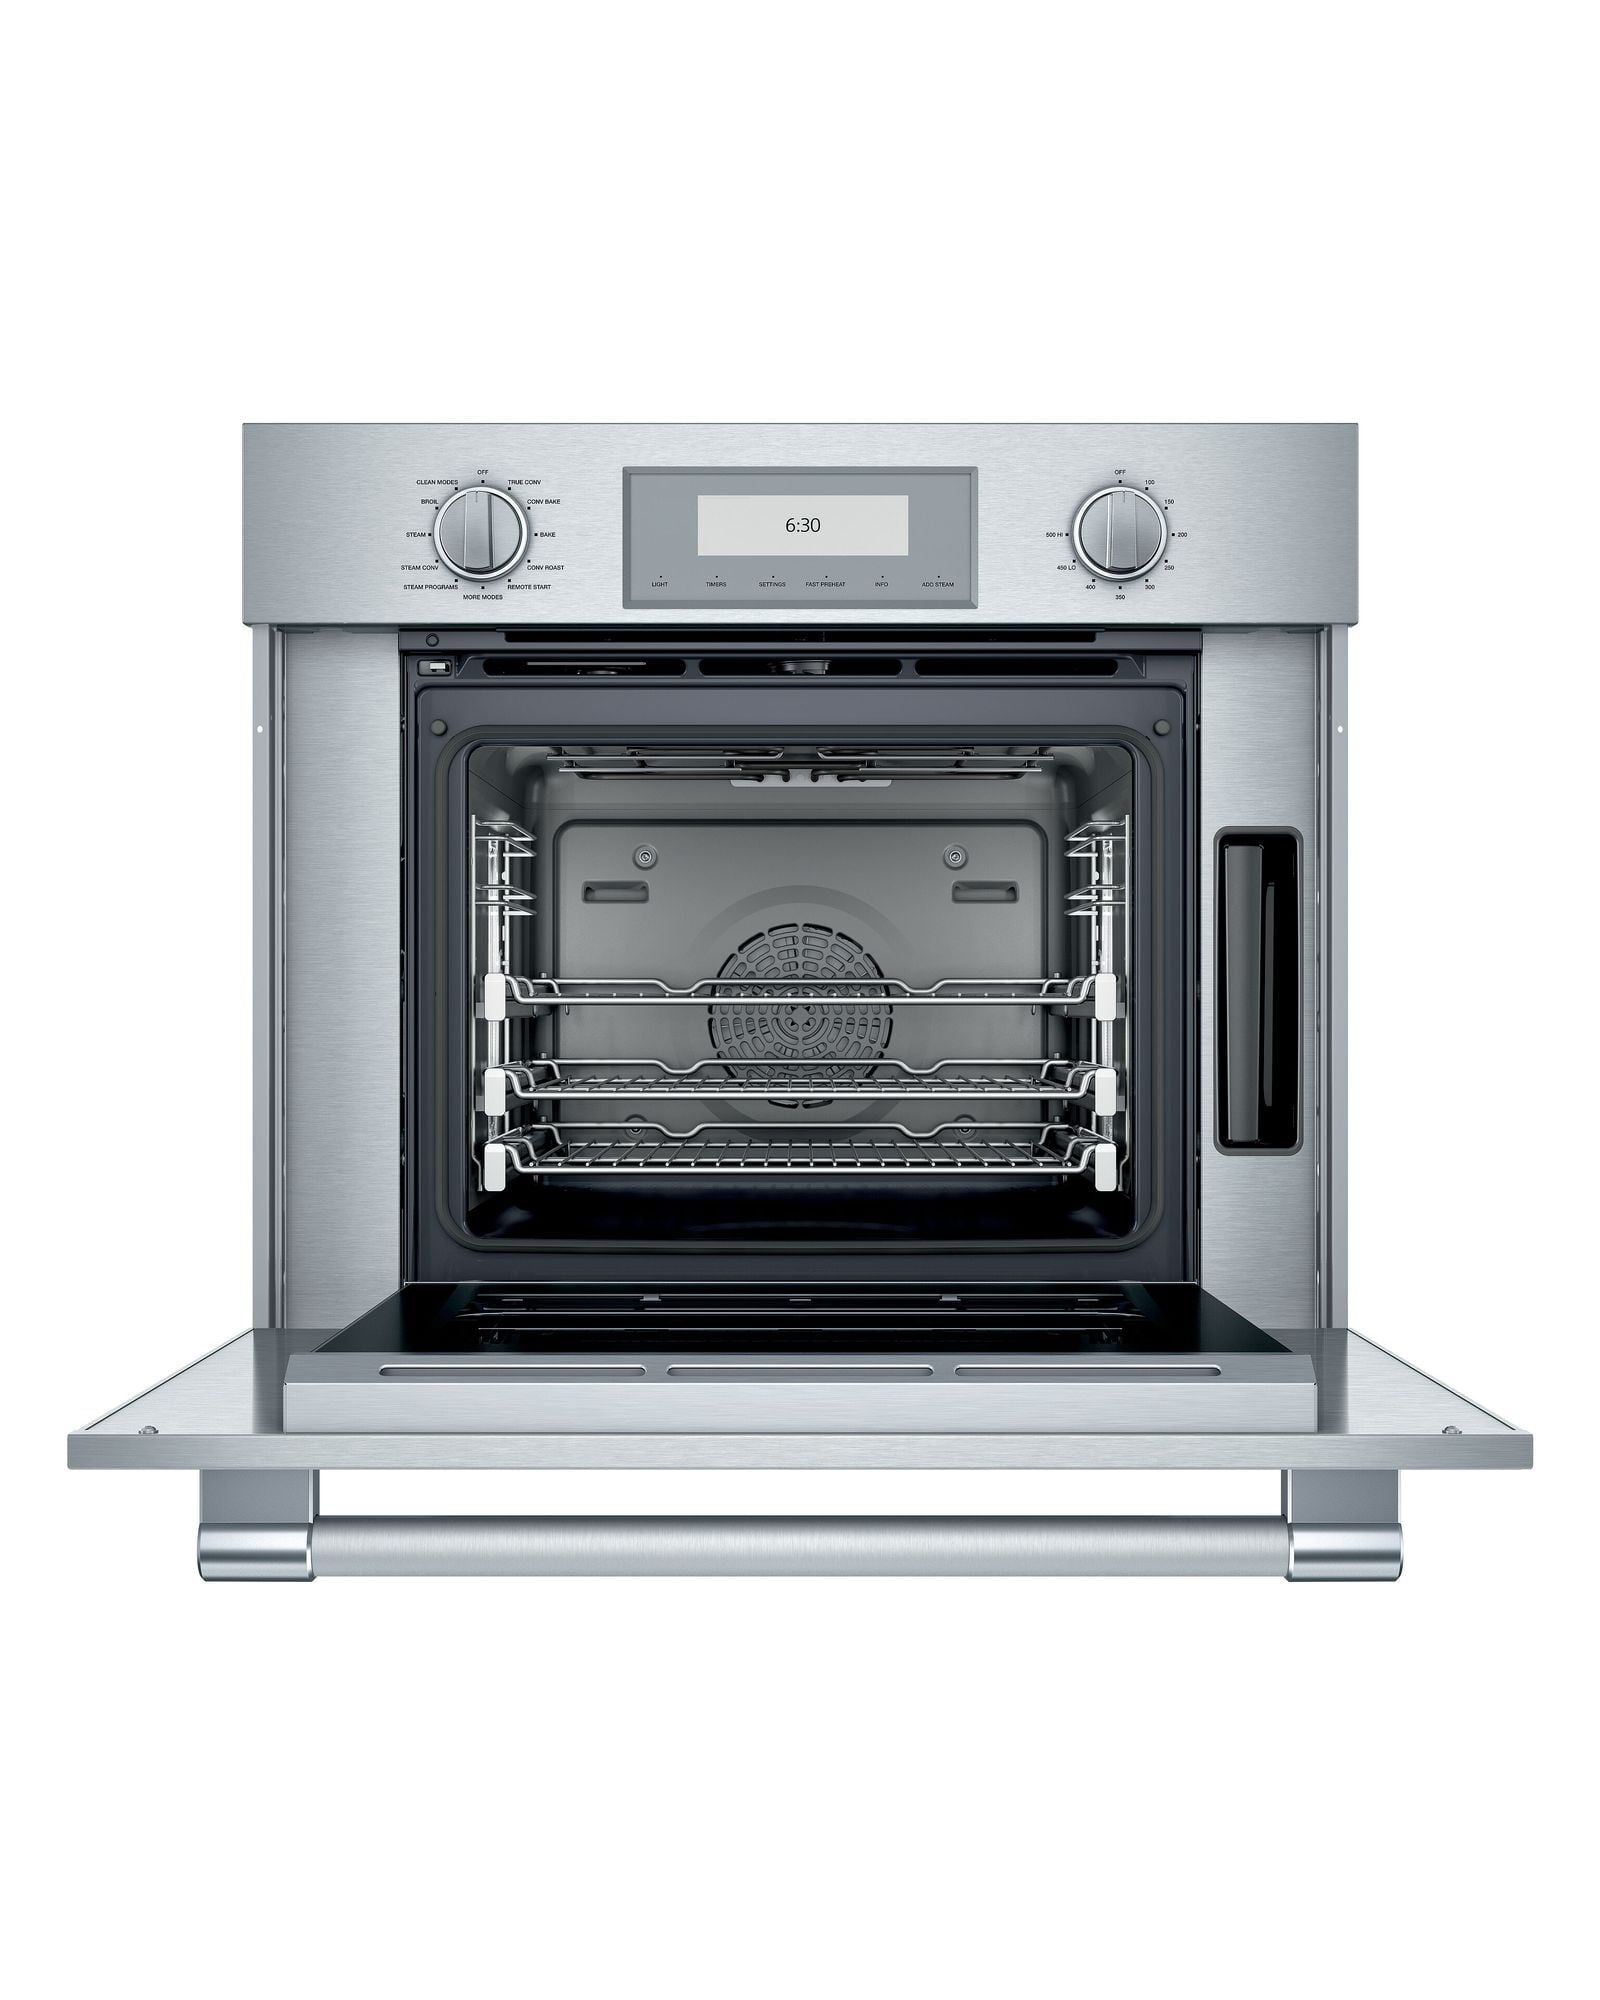 Steam Ovens & Combi-Steam Ovens, Product Features